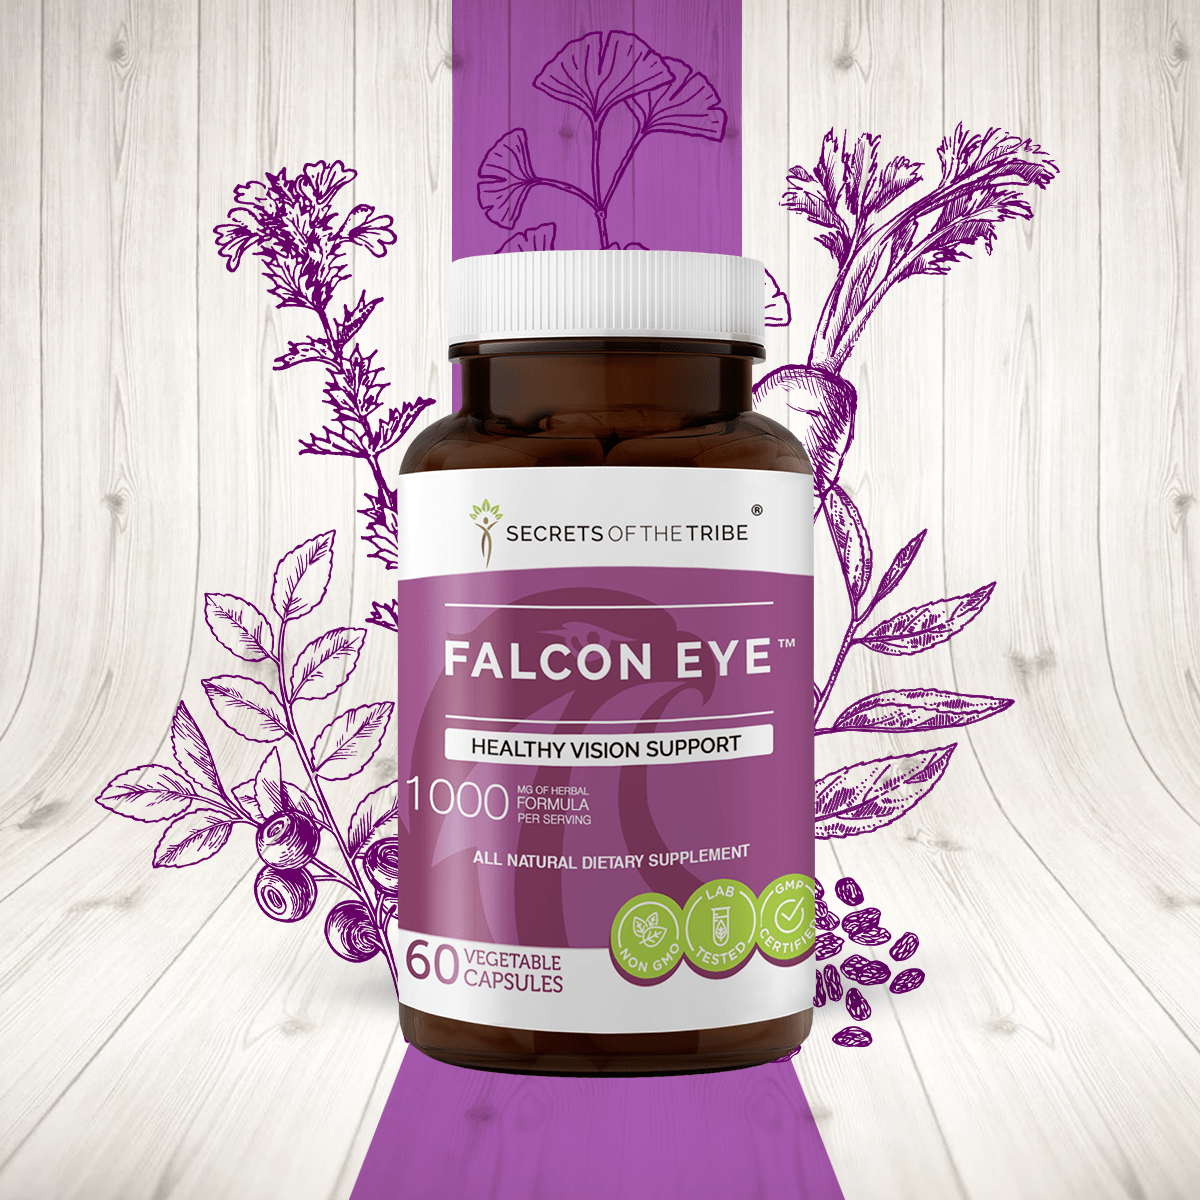 Falcon Eye Capsules. Healthy Vision Support